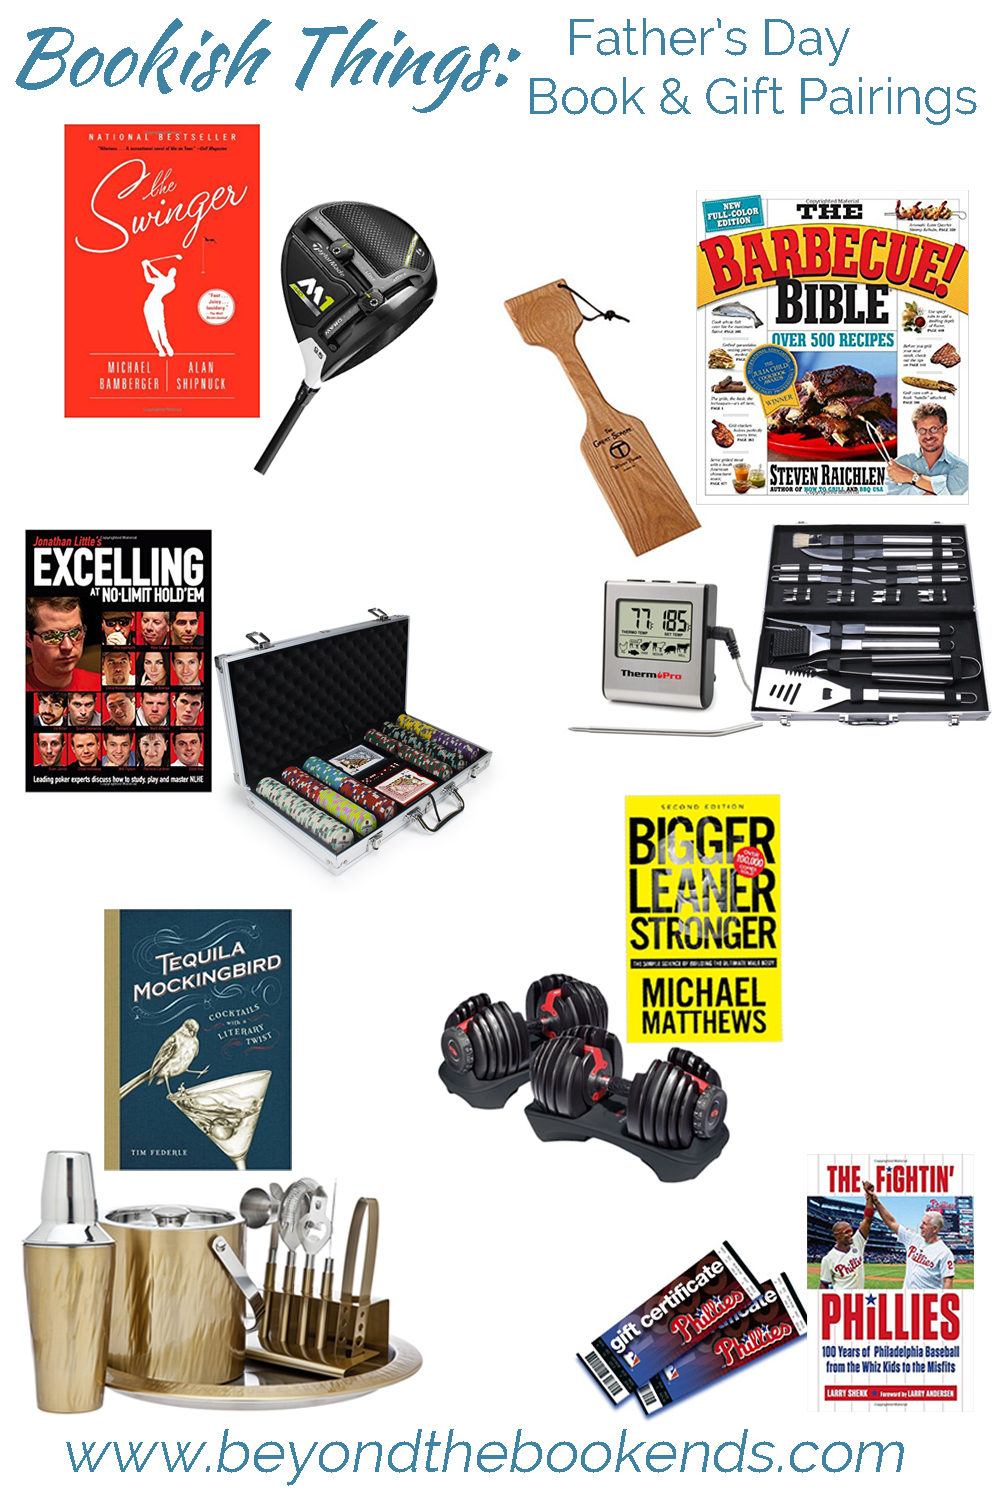 Looking for the perfect father's day gifts? We've got you covered with these excellent selections.